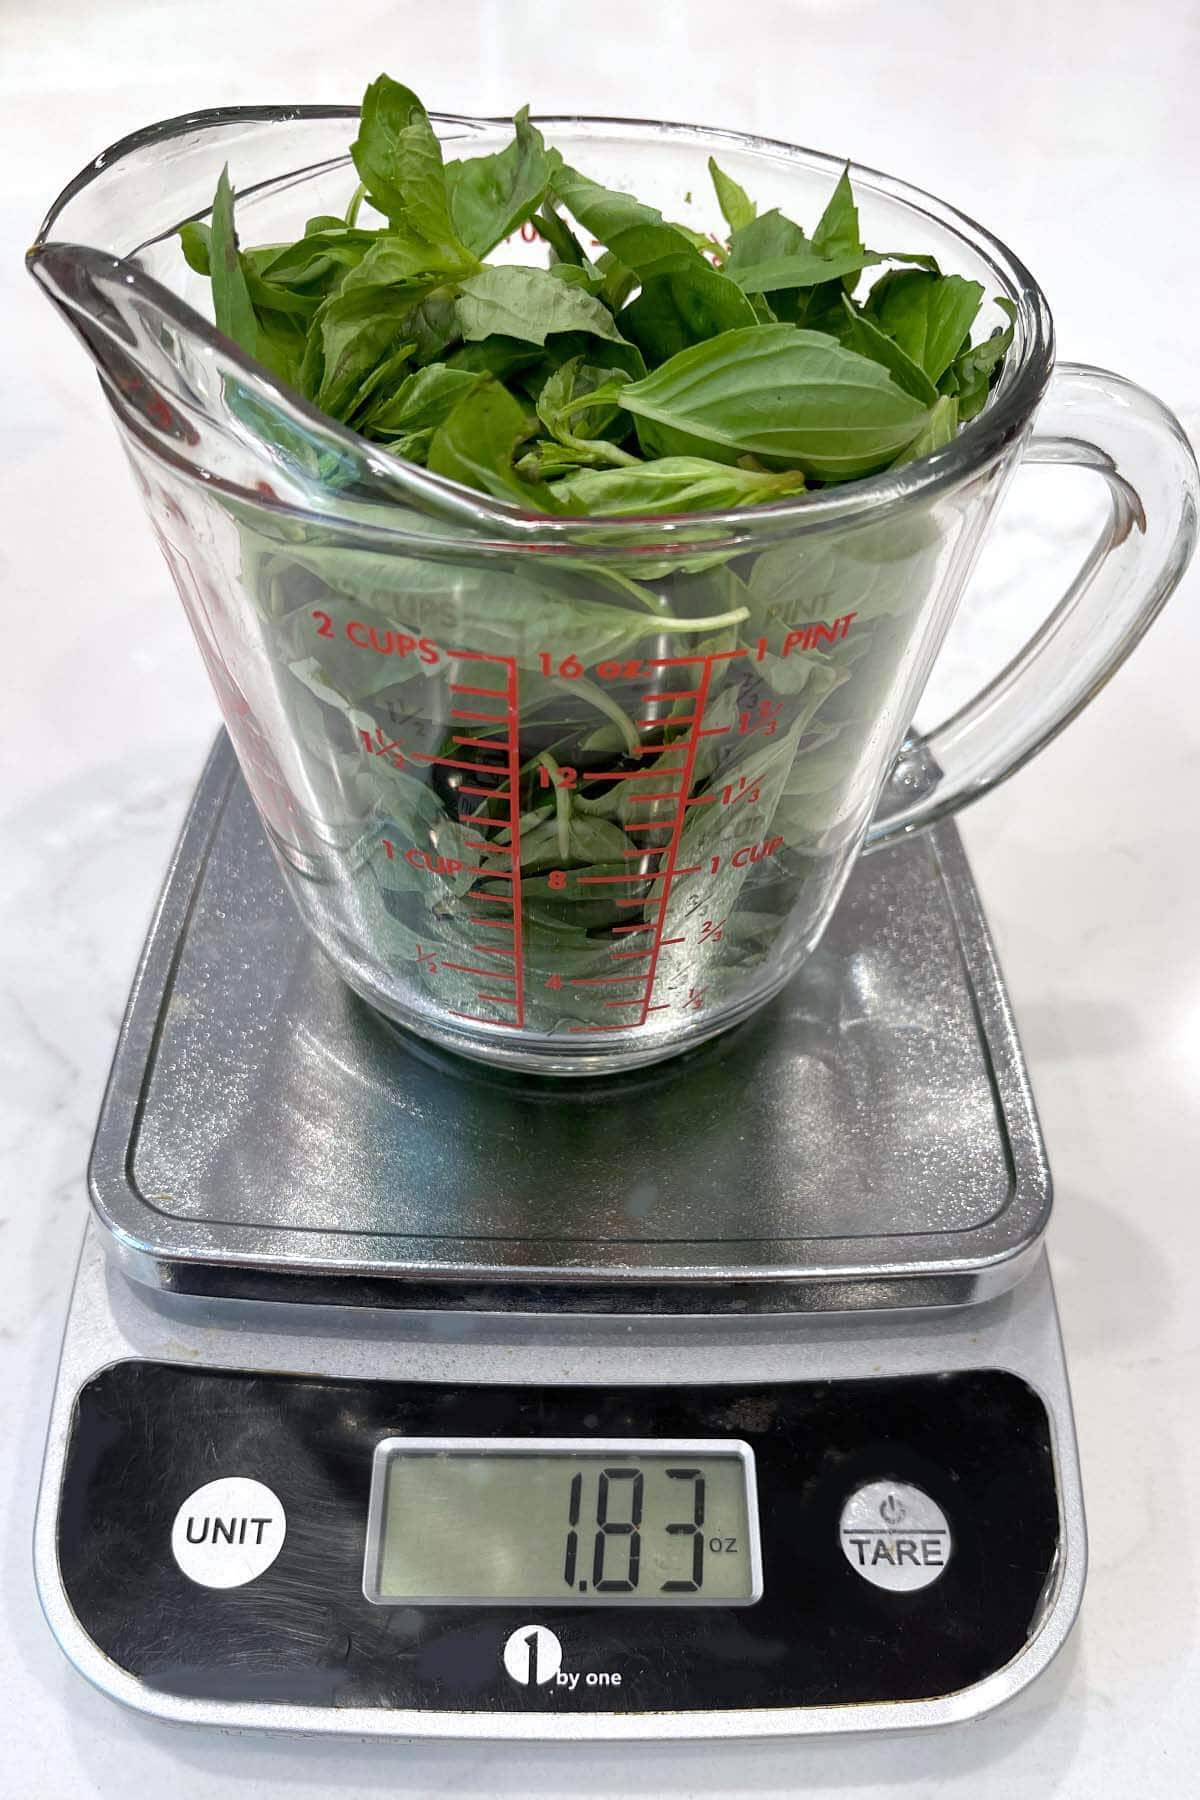 basil leaves being weighed.